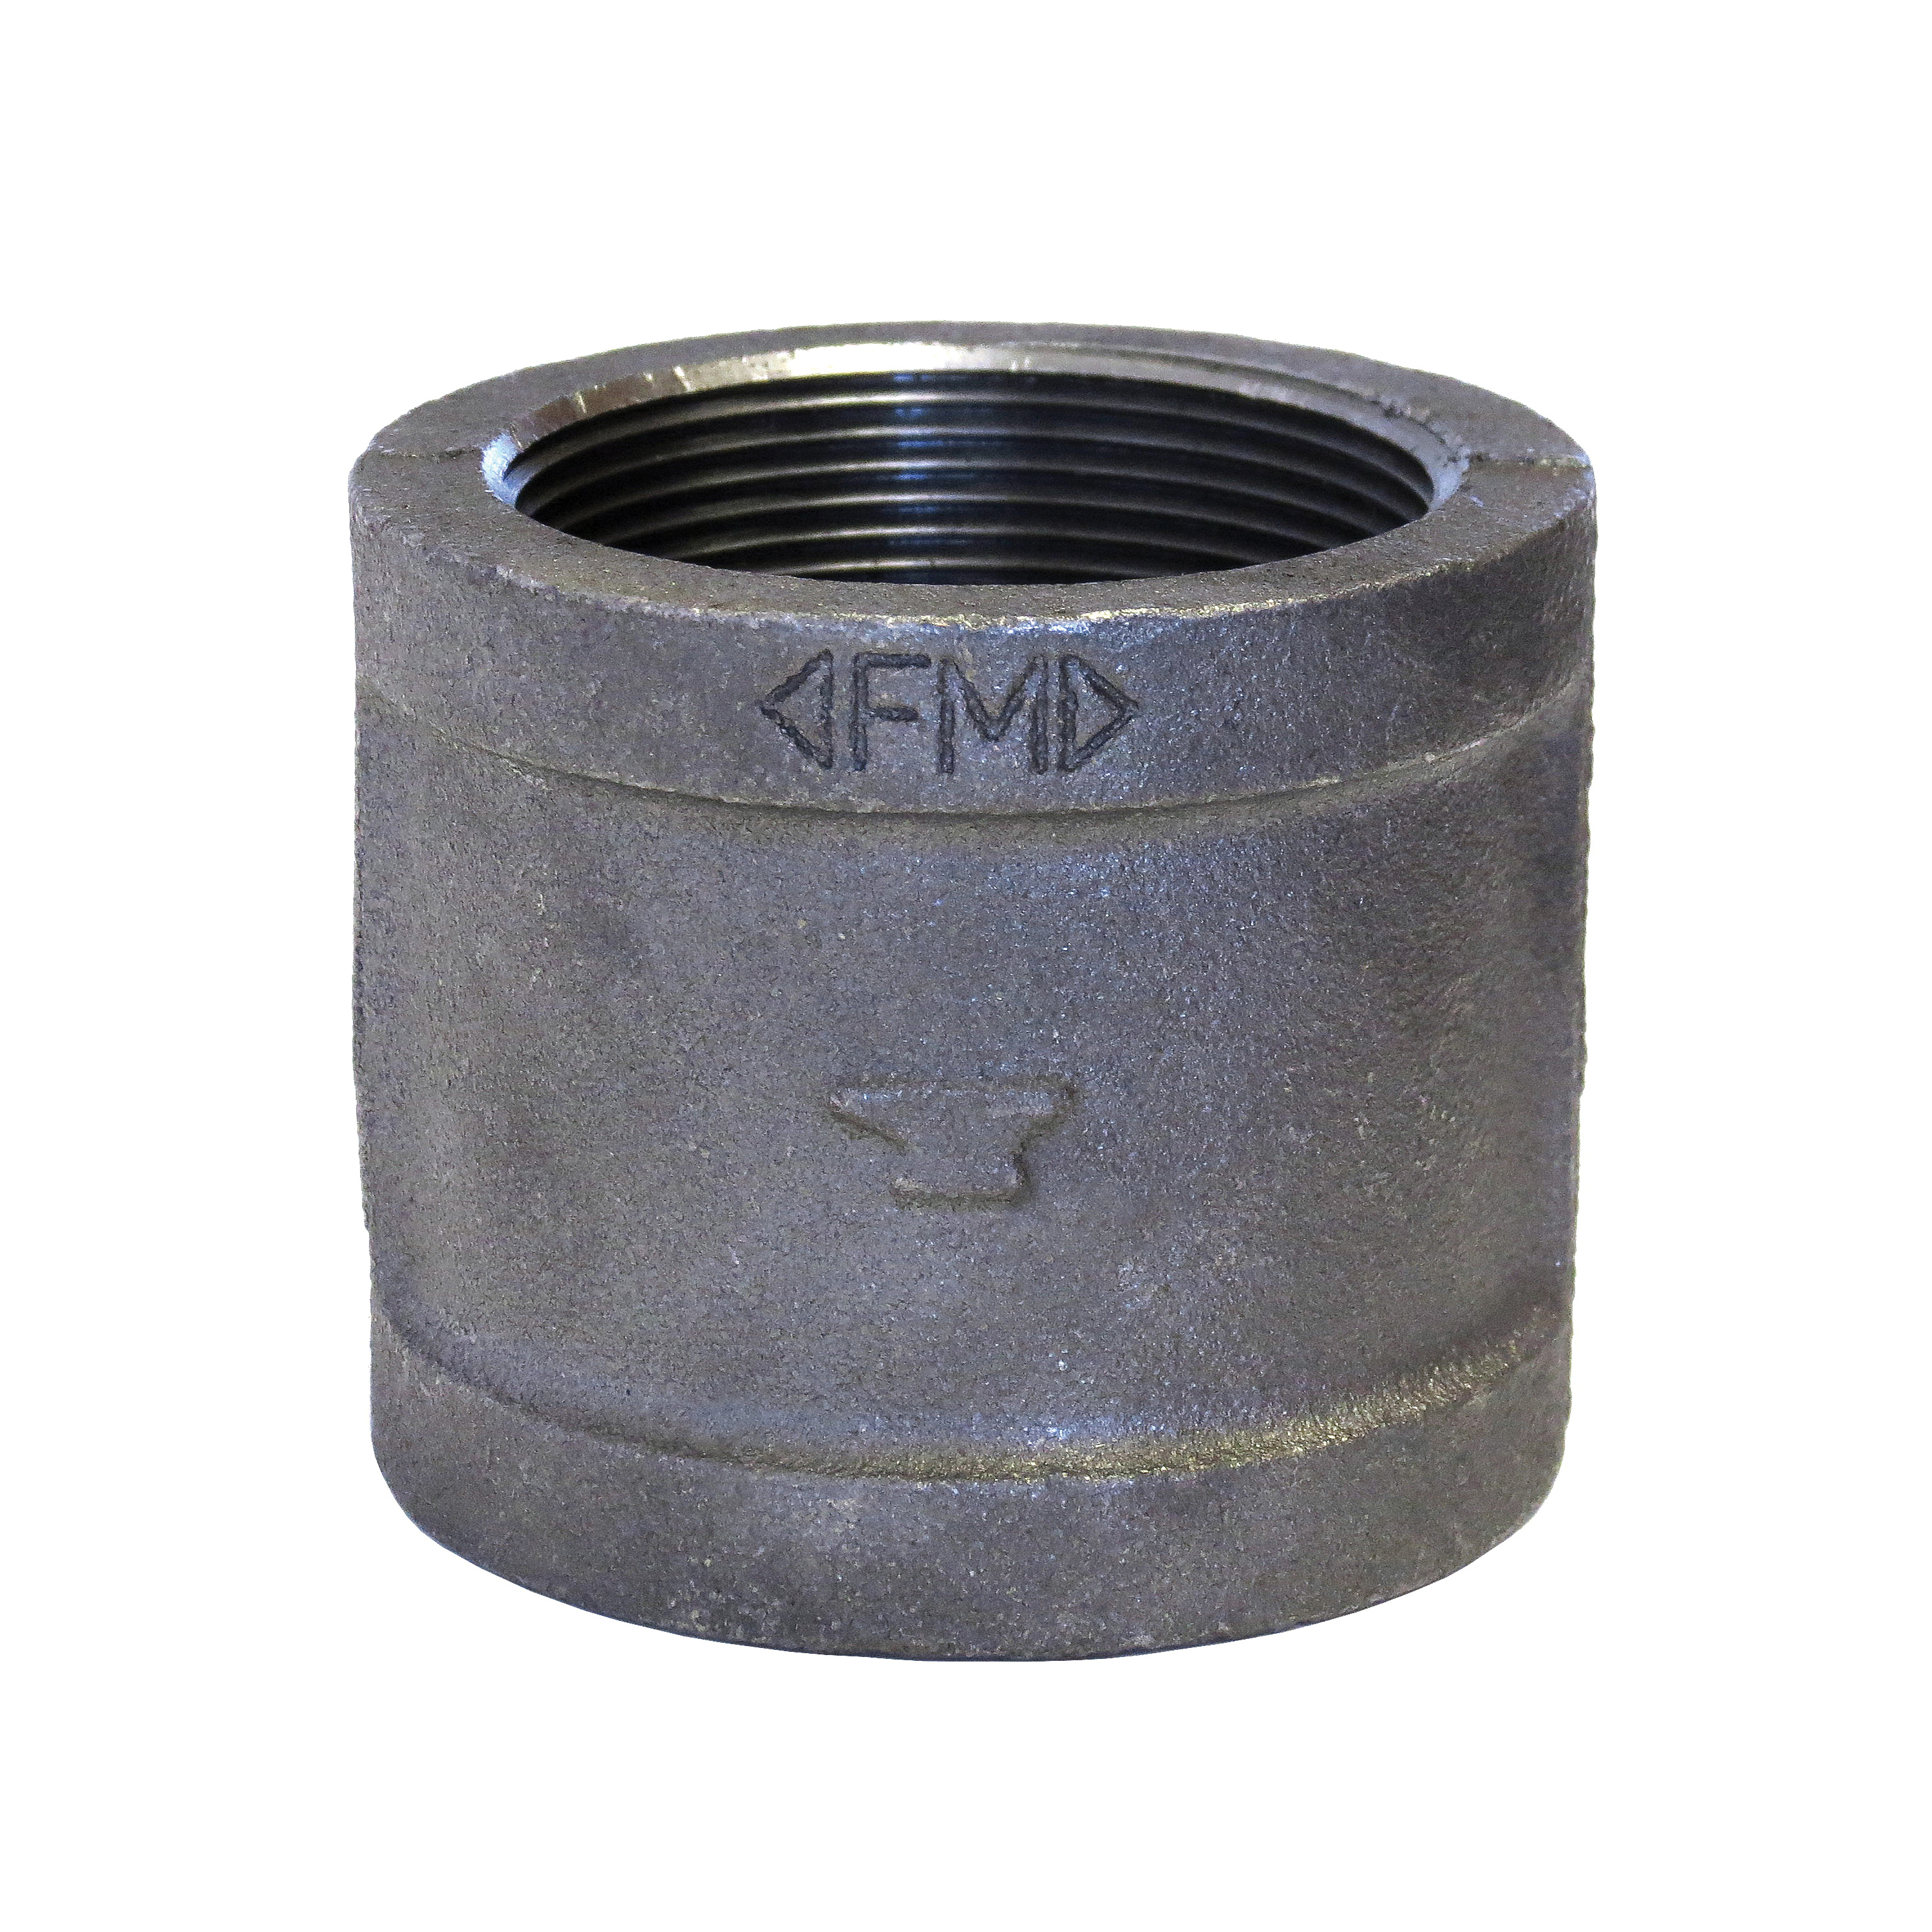 Anvil® 0811079607 Coupling, 1/8 in Nominal, Malleable Iron, Galvanized, Import